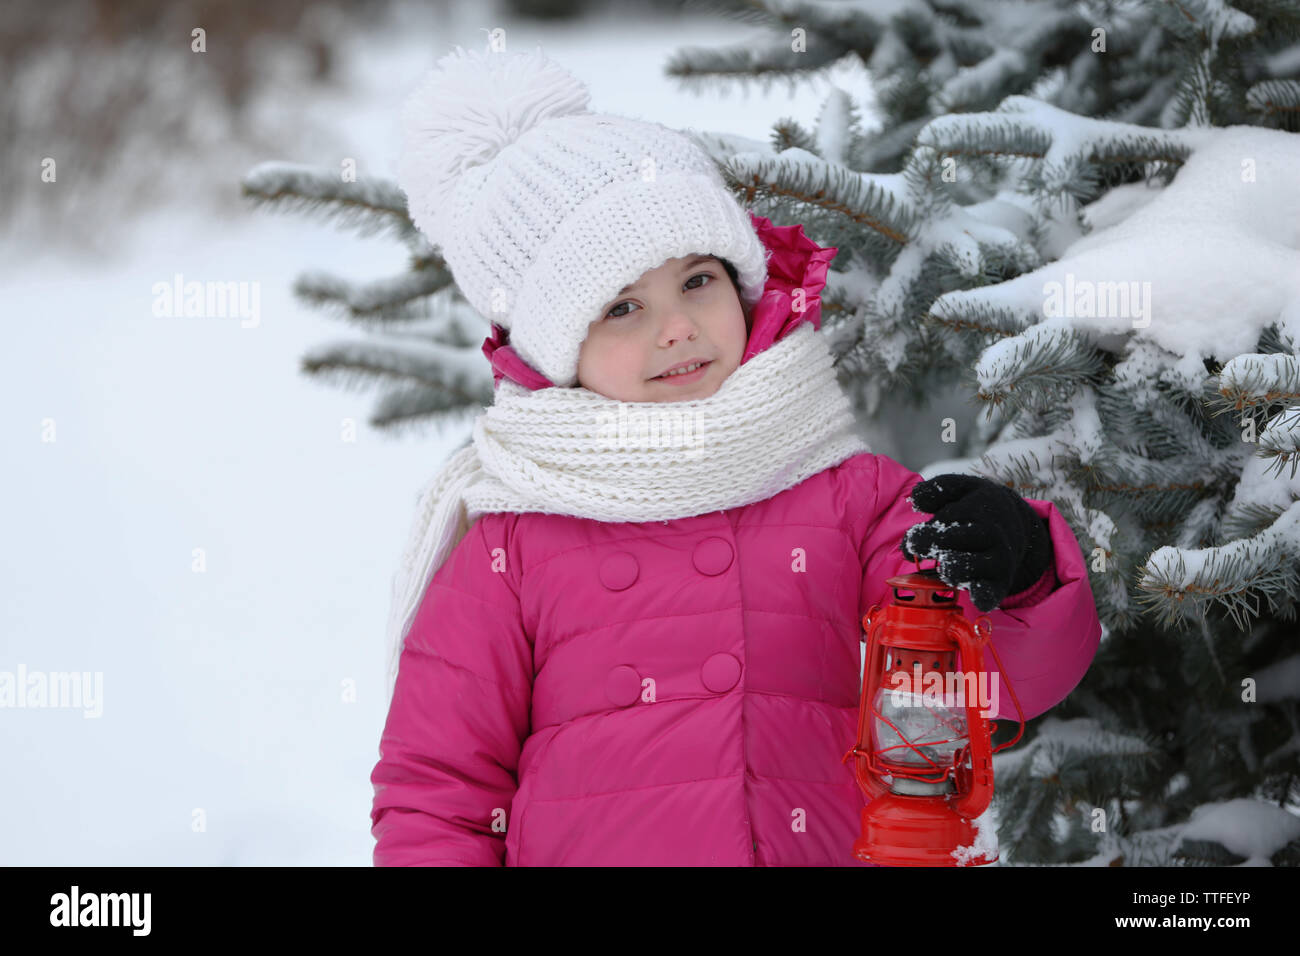 Little girl with winter clothes holding red lantern near fir tree in snowy park outdoor Stock Photo